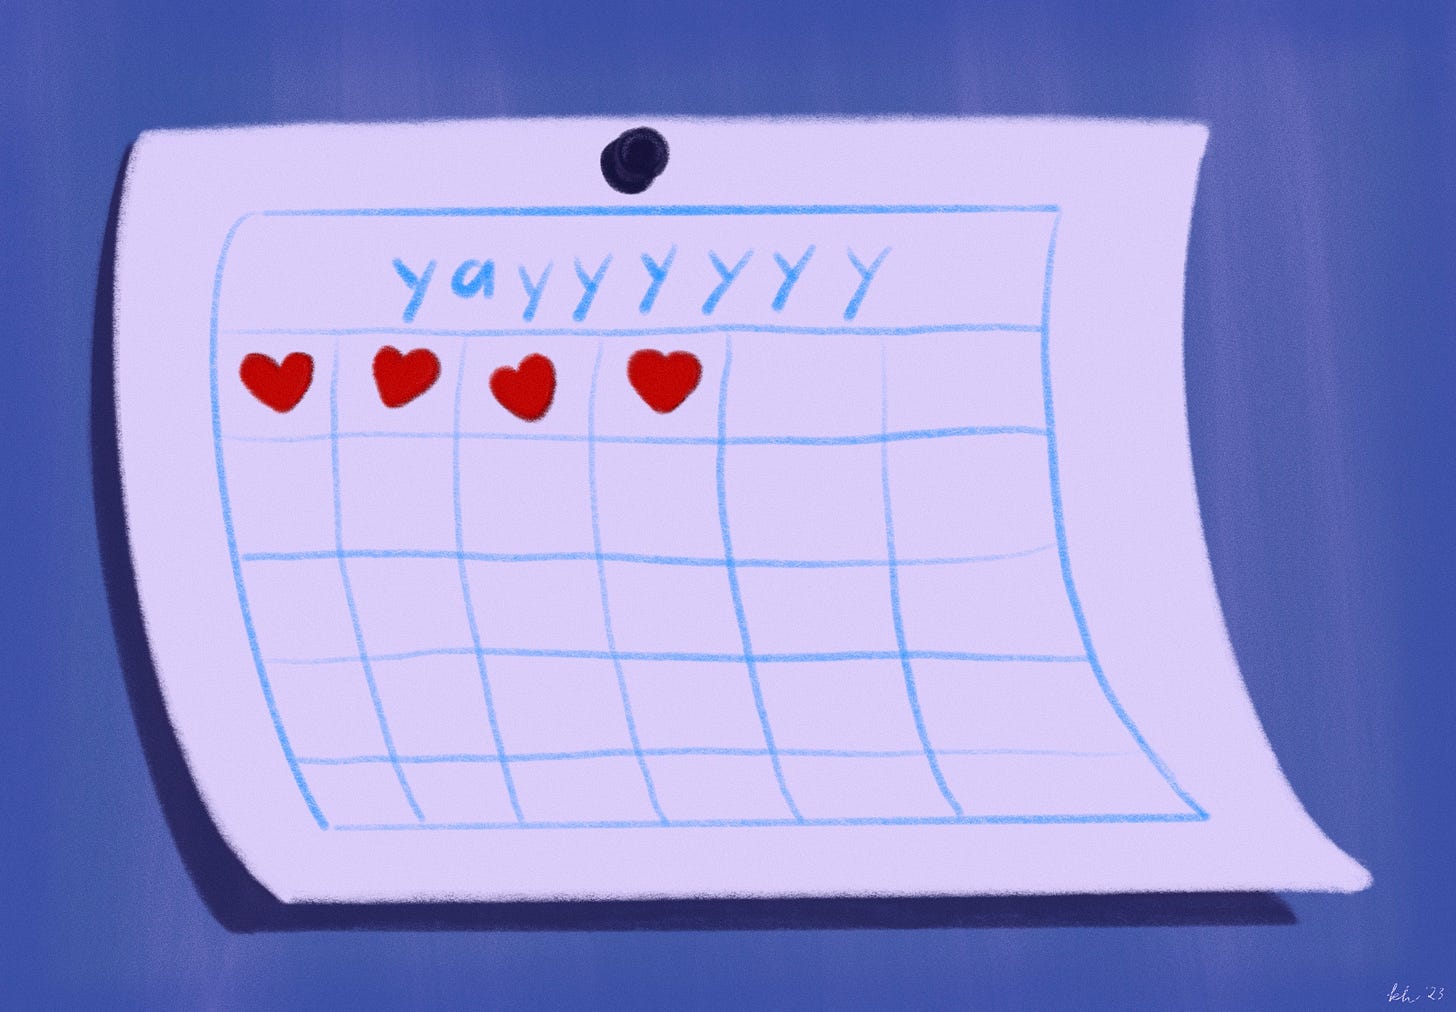 Illustration of a hand-drawn sticker chart tacked to the wall. The chart has six columns and five rows of boxes. Four boxes in the top row are filled with red heart stickers. A label at the top of the chart reads “yayyyyy” 